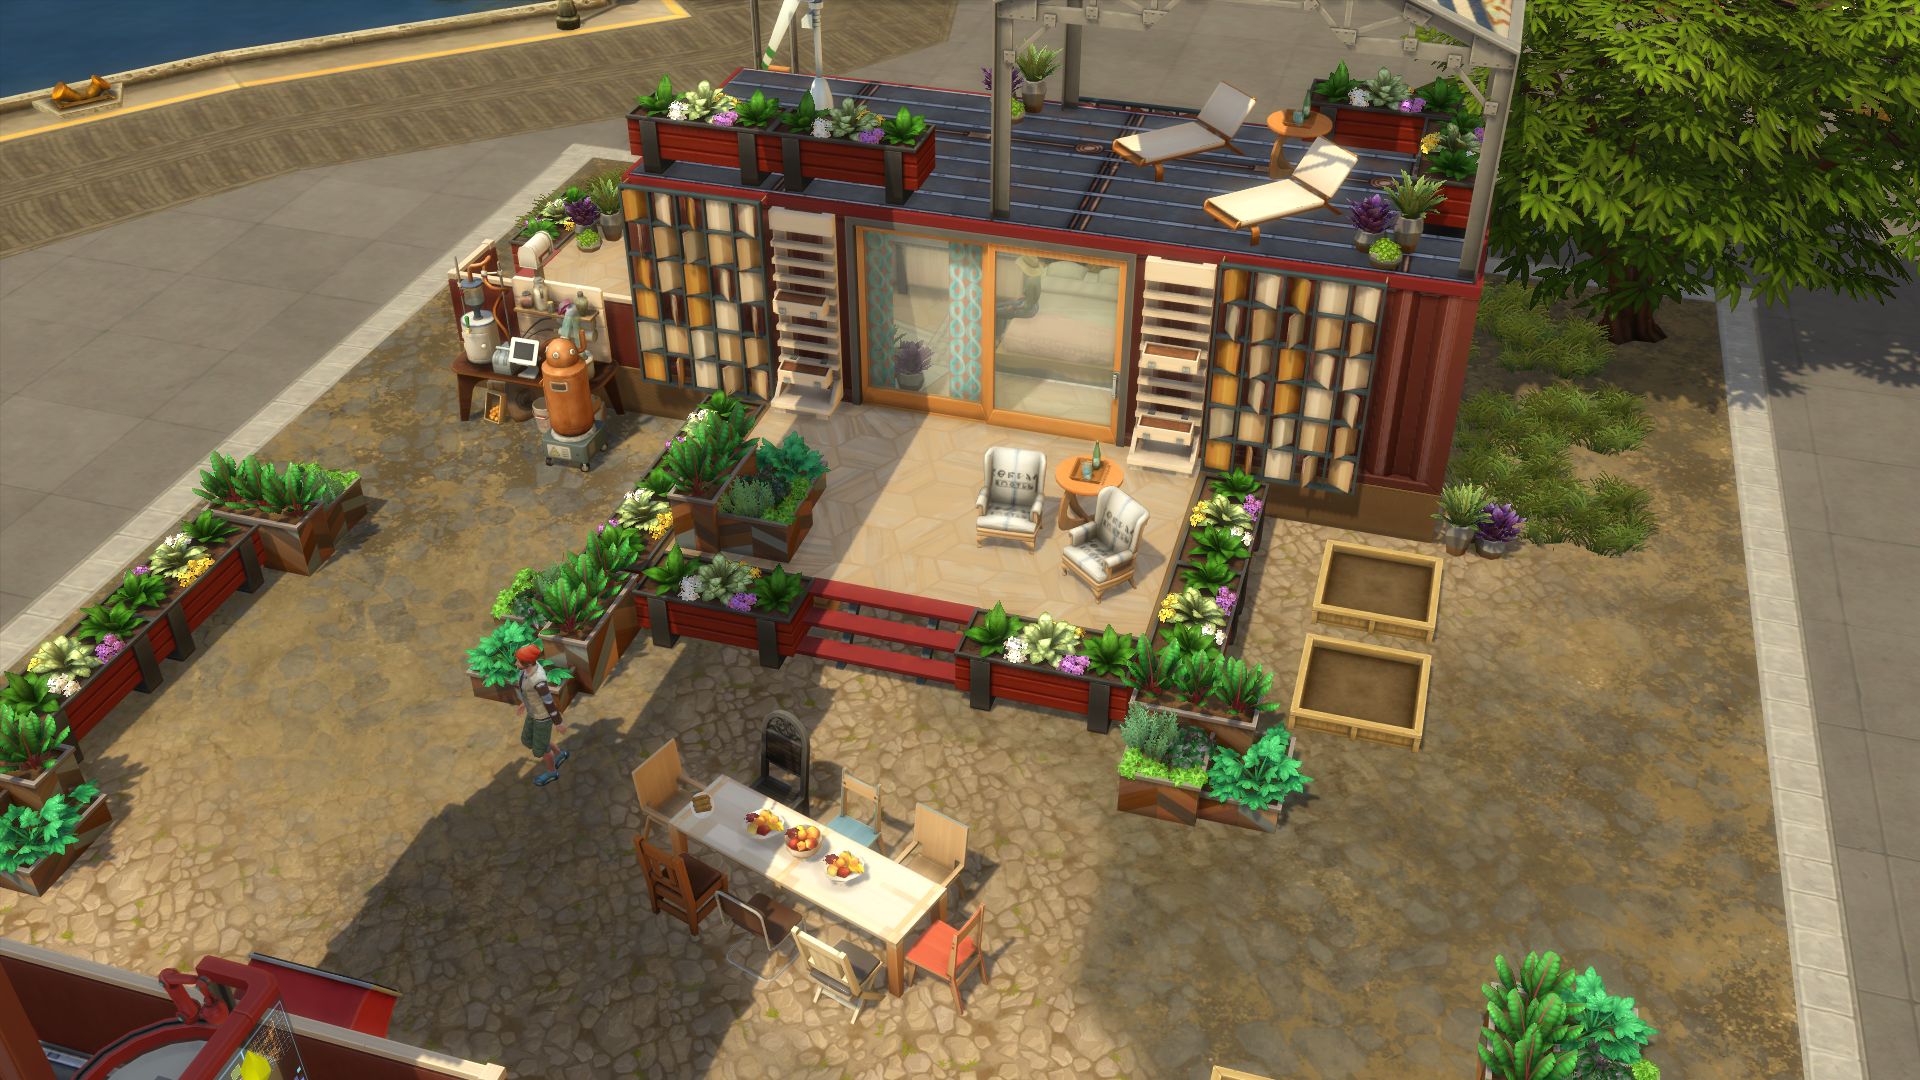 The Sims 4 Eco Lifestyle - Sims Community